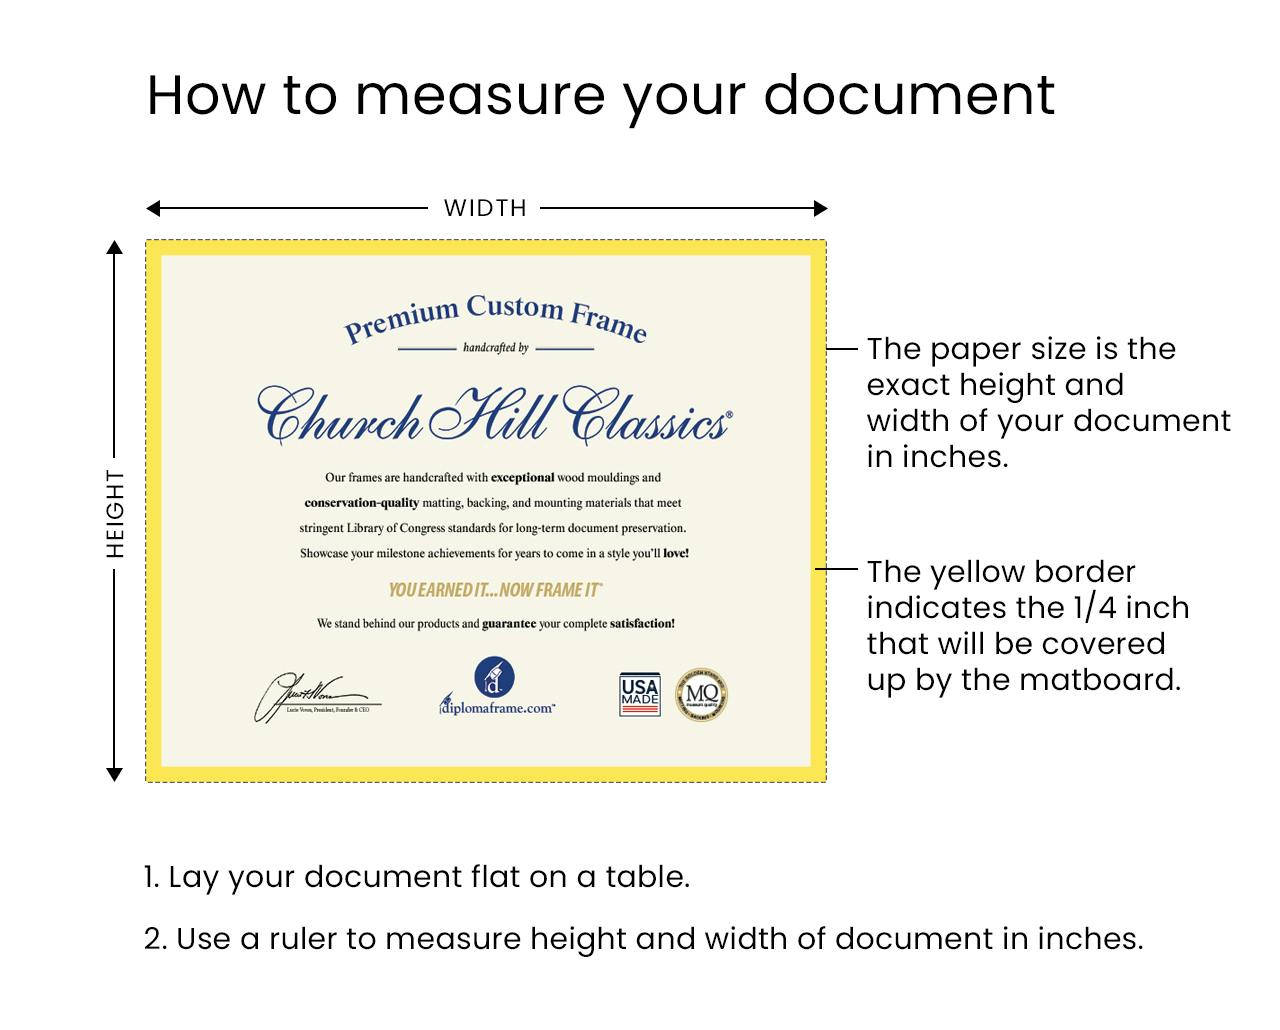 How to measure your document